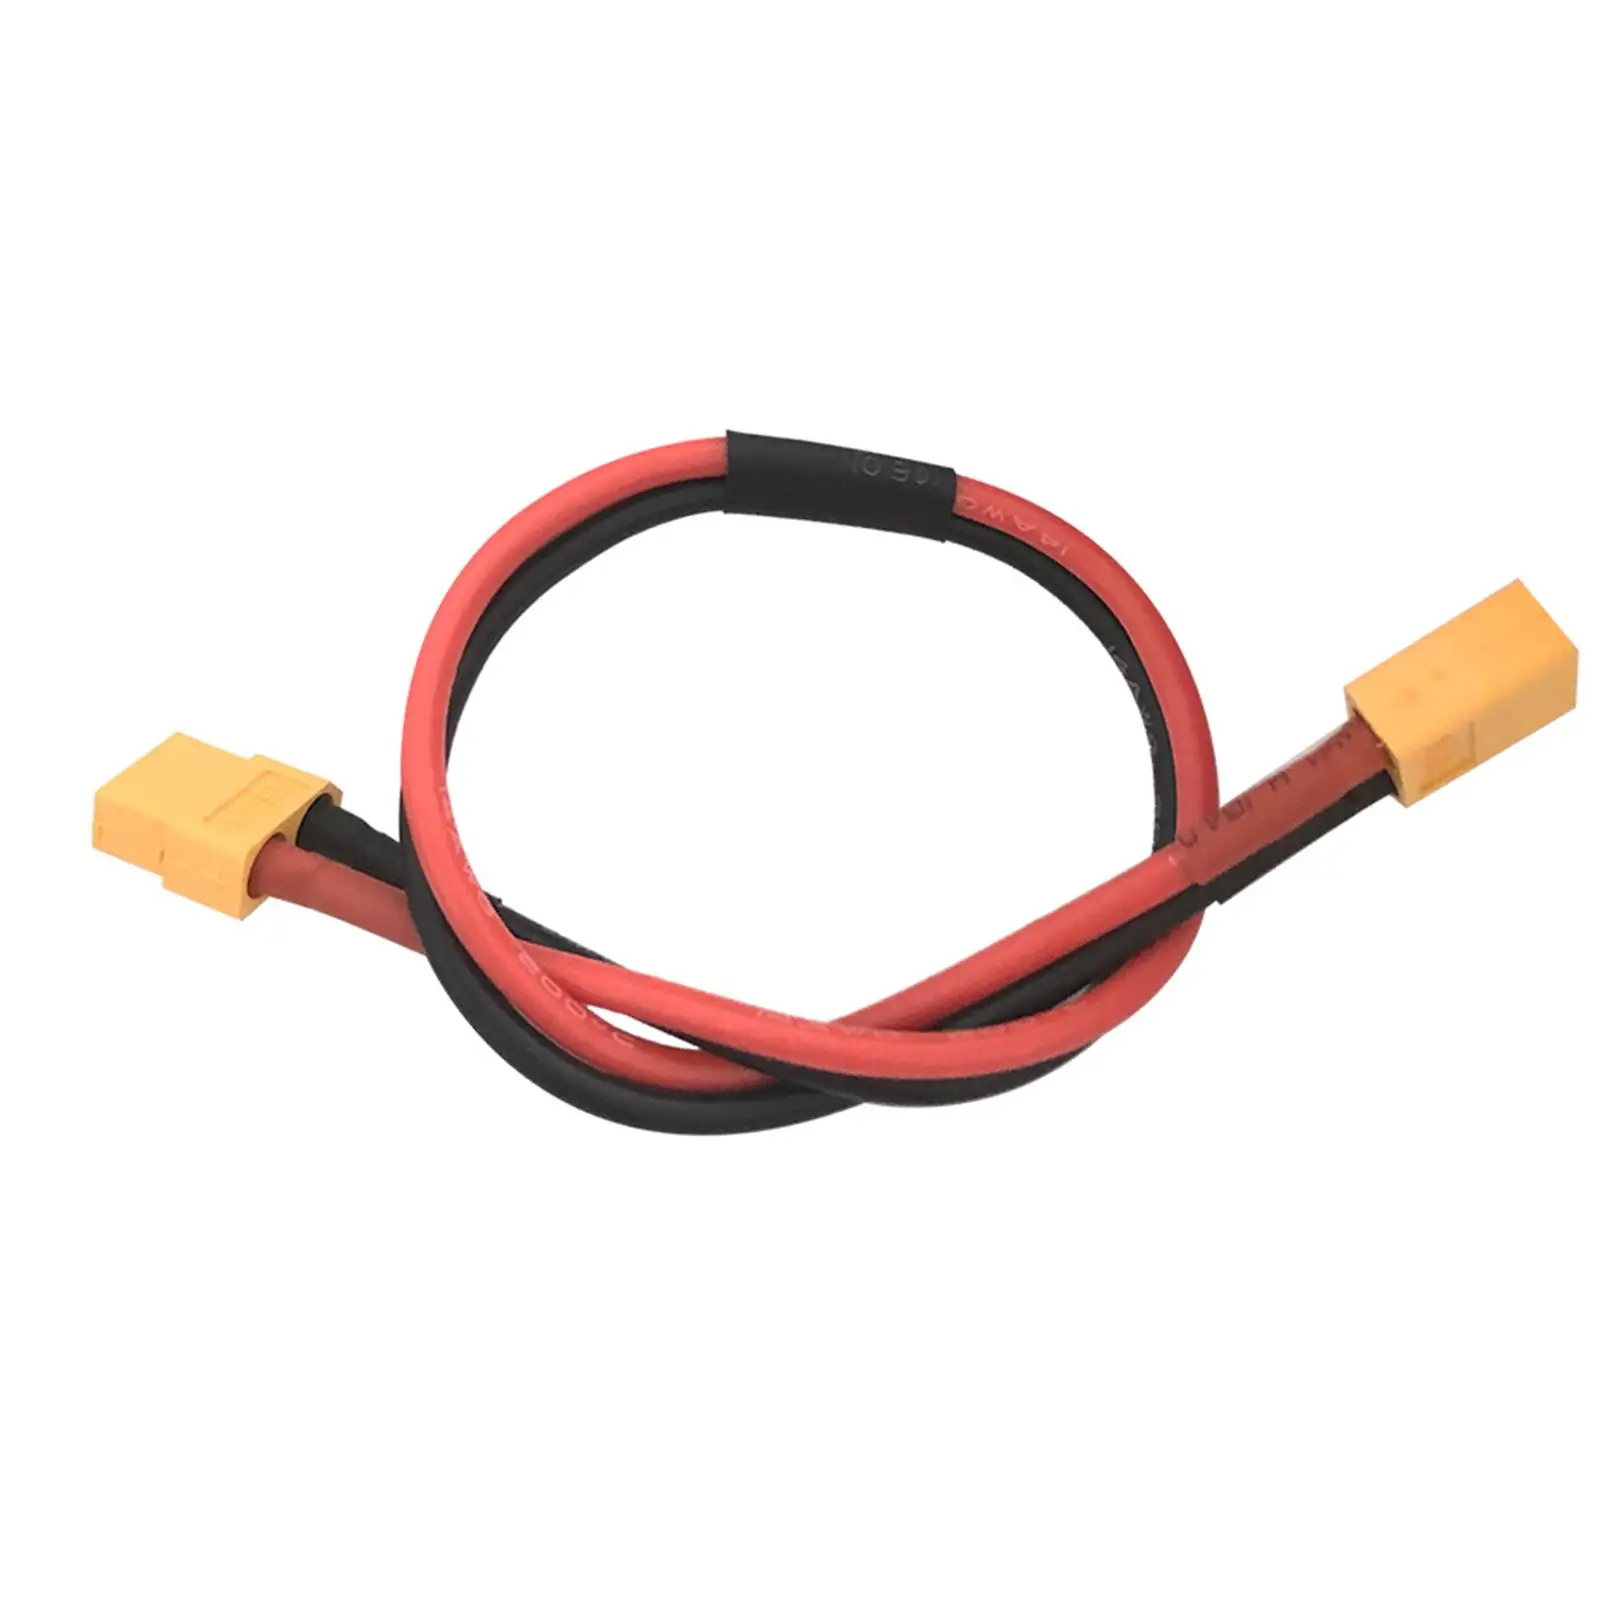 XT60 to XT60 Easy to Install Adapter Connector Transfer Cable Spare Parts Extension Cable Charger Cable Replaces Female to Male